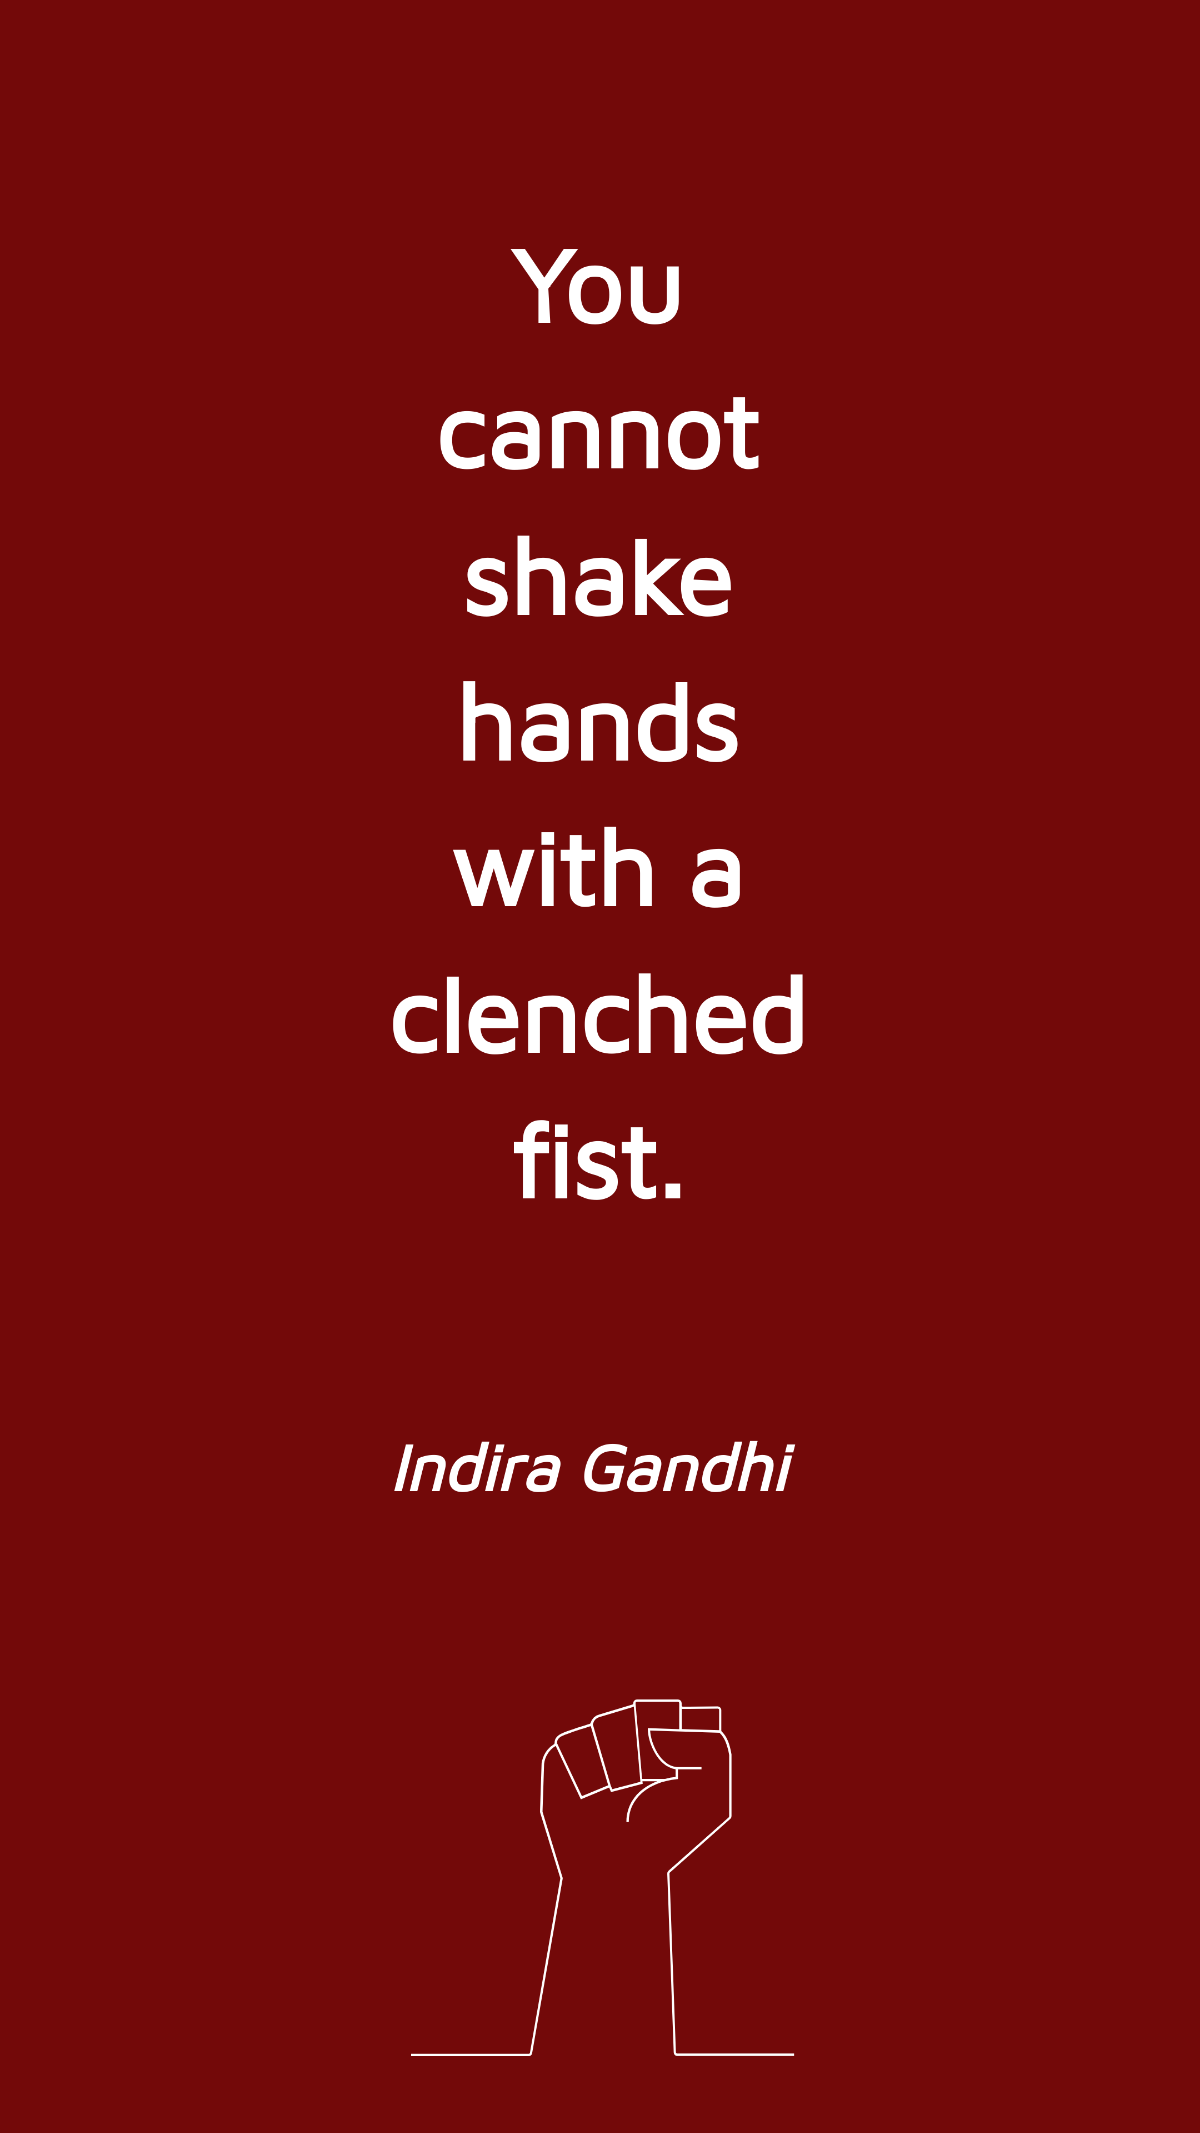 Indira Gandhi - You cannot shake hands with a clenched fist. Template